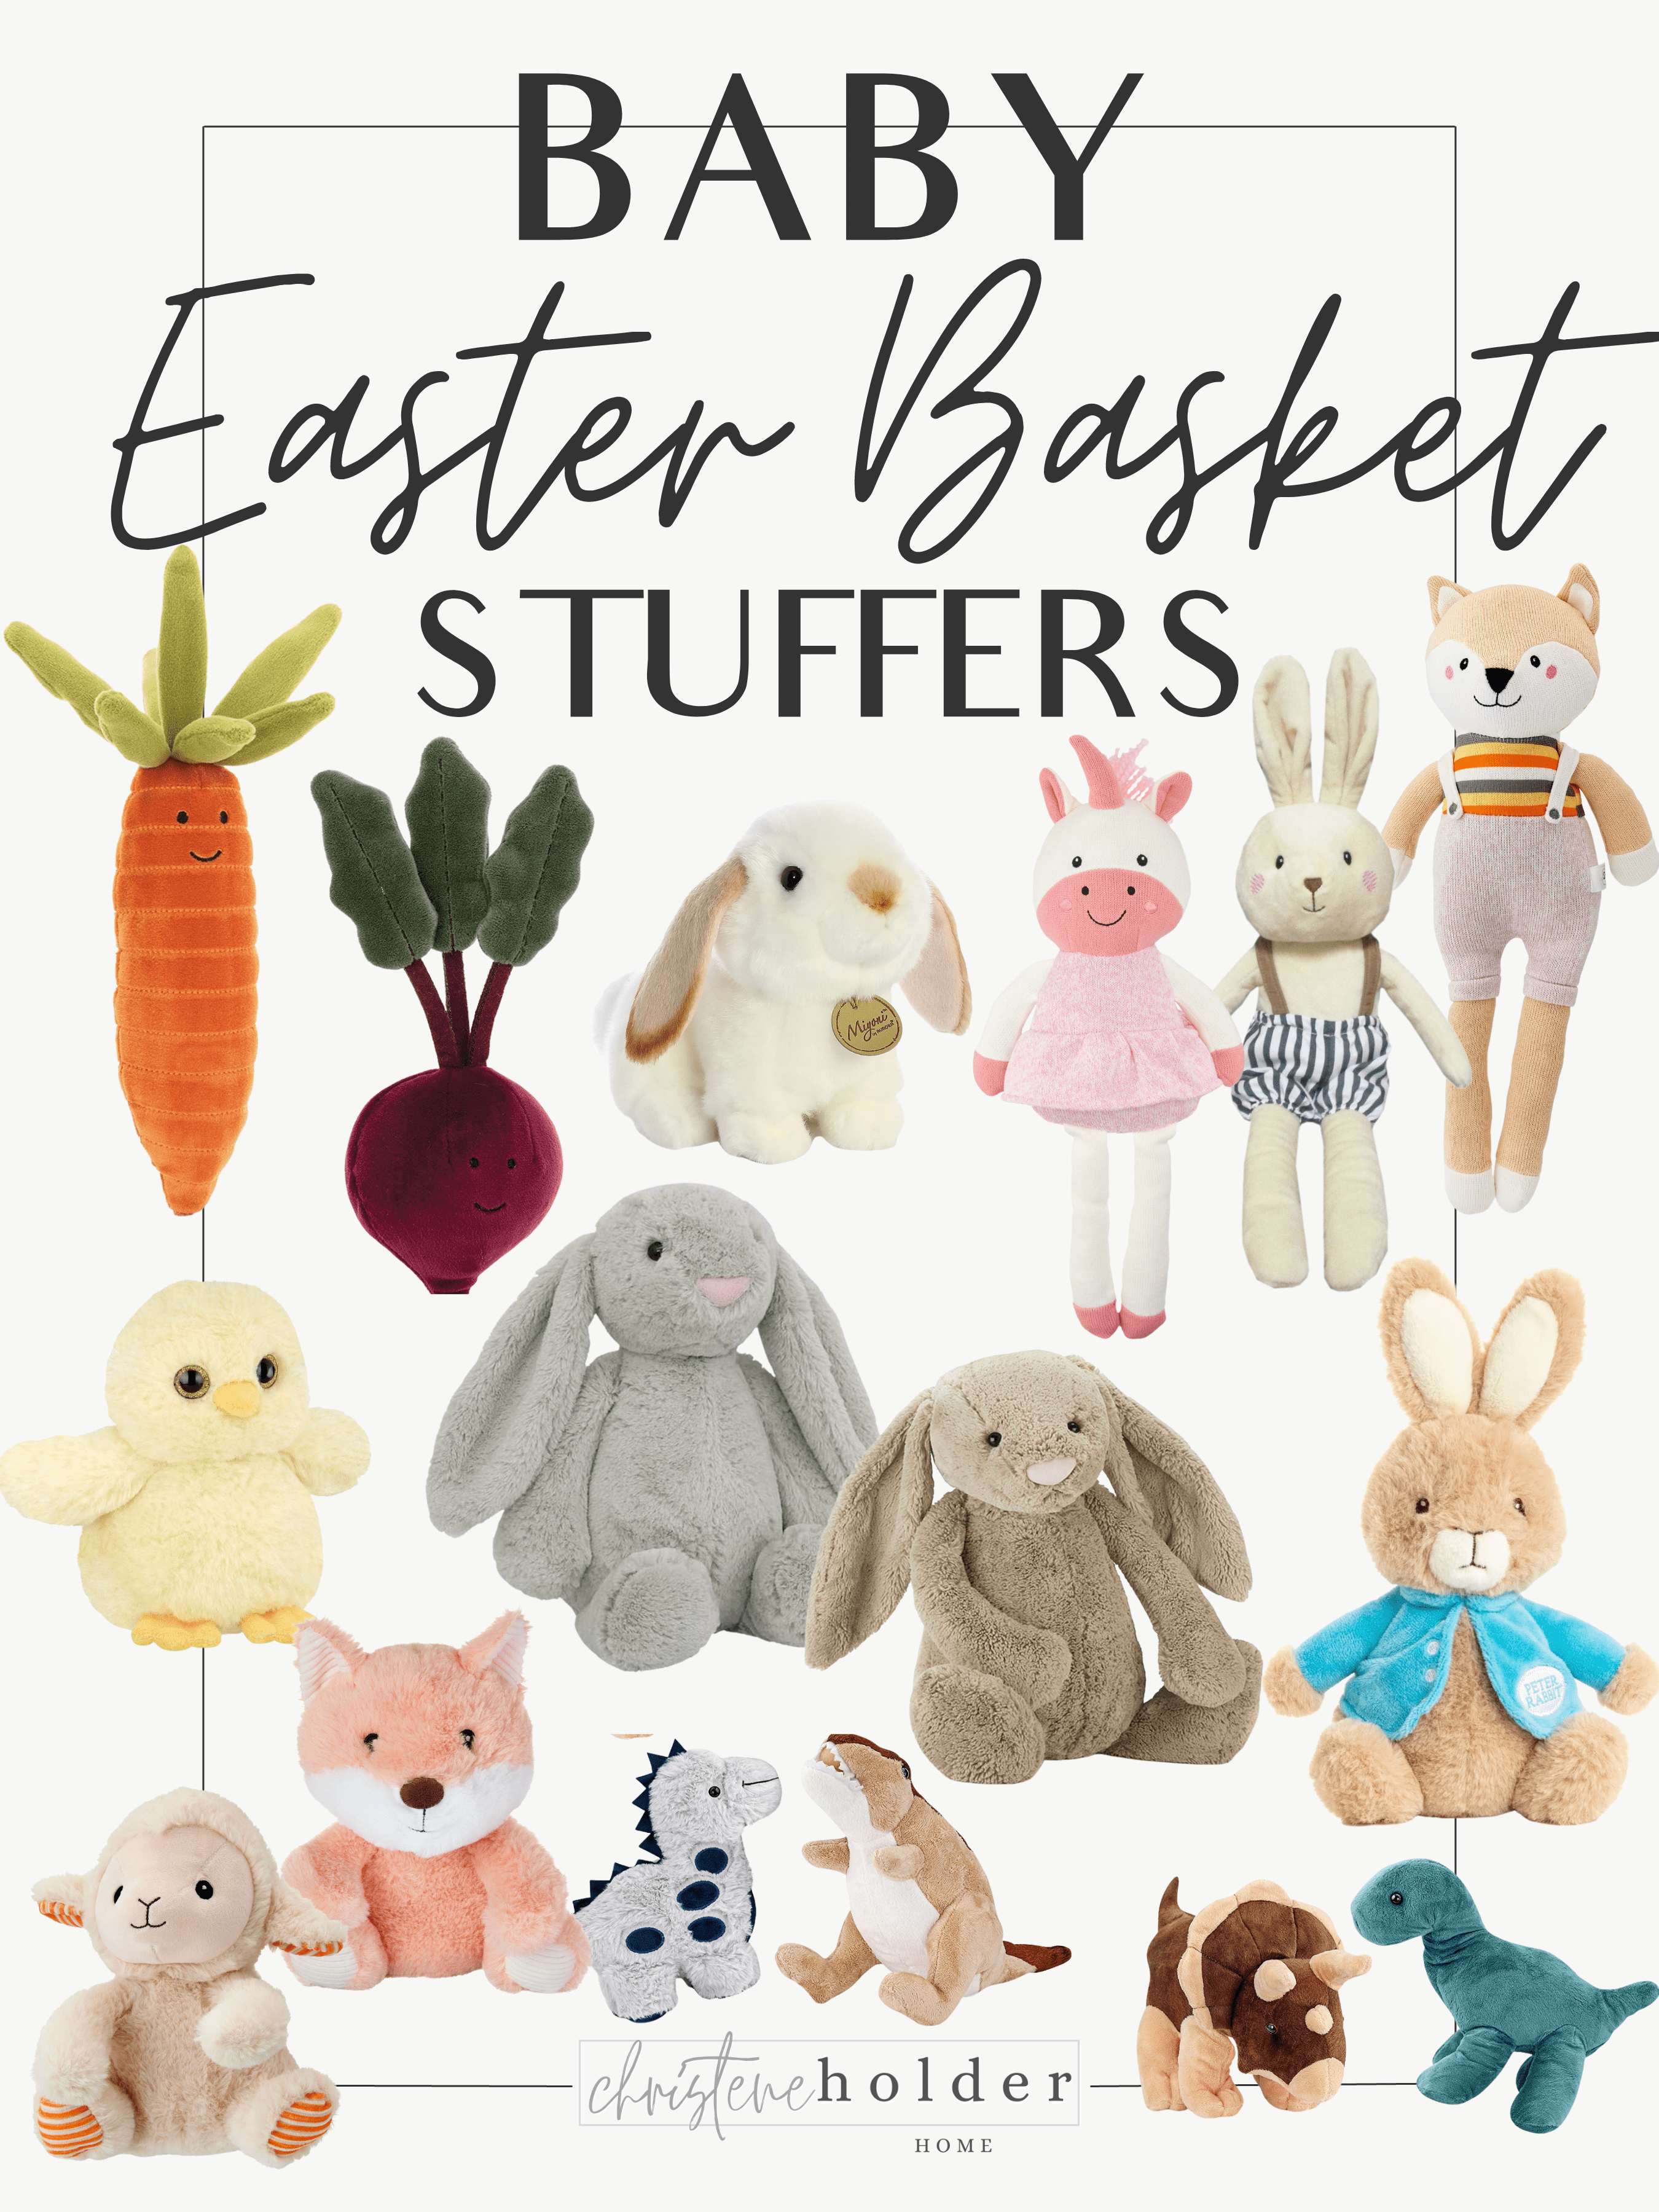 Easter stuffed animals for babies